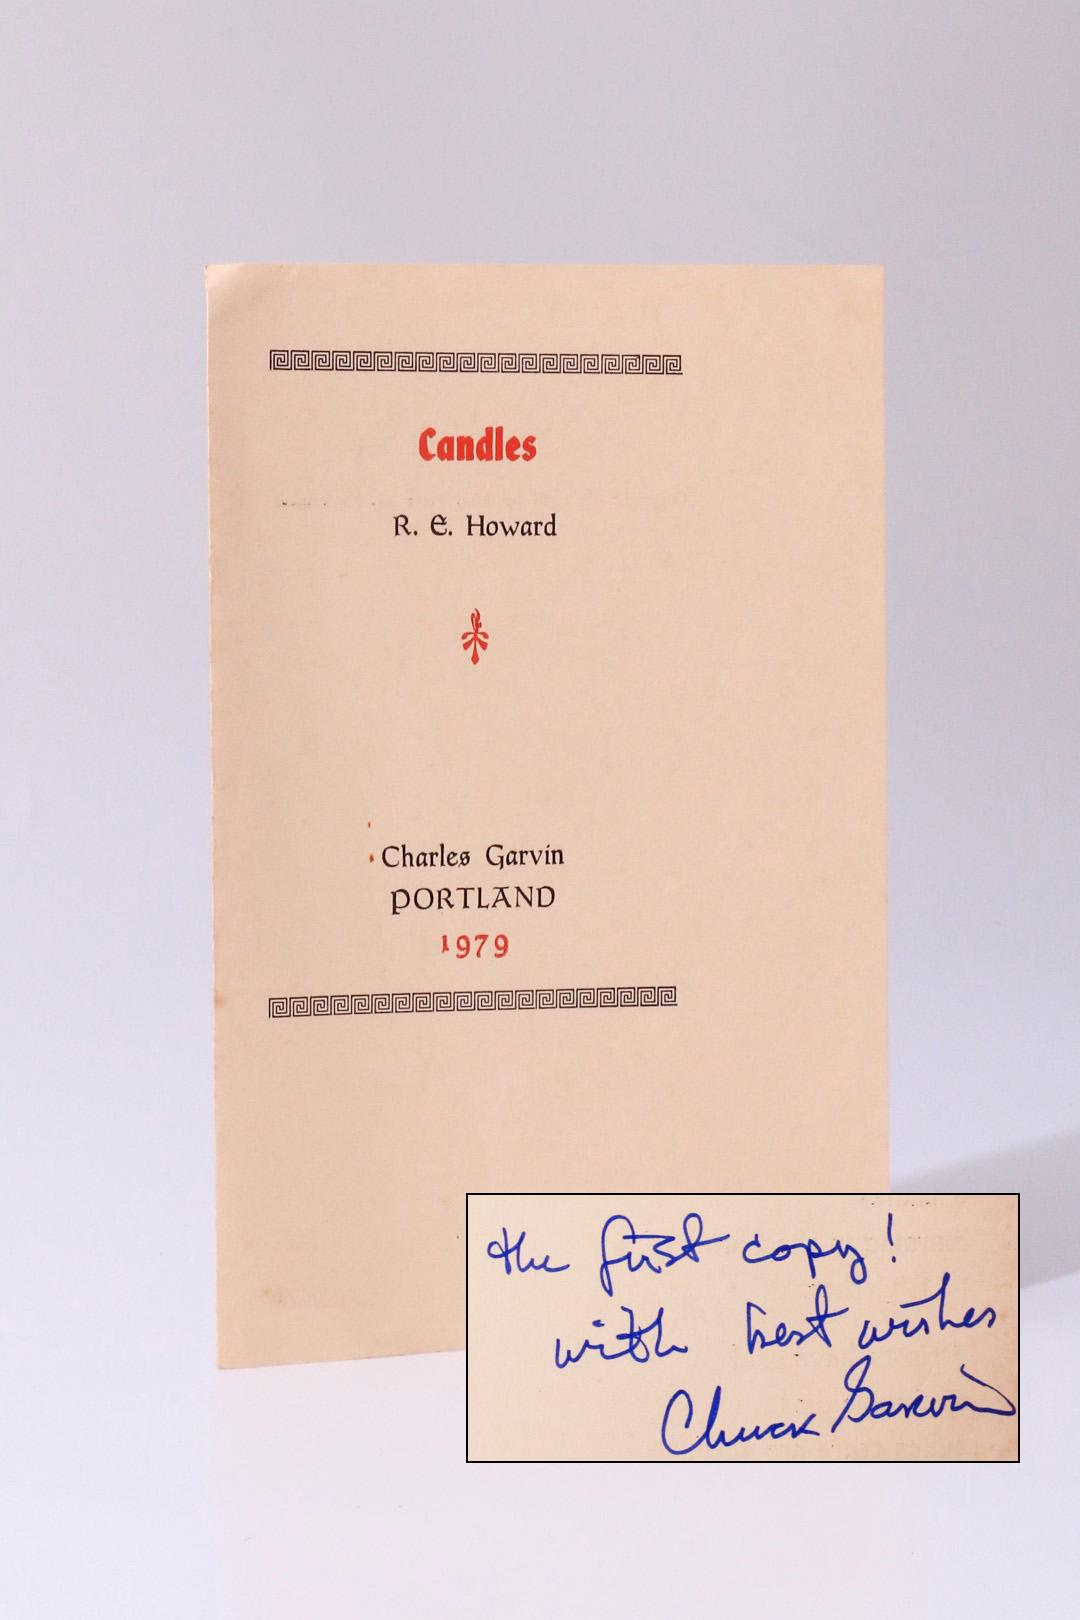 R.E. Howard - Candles - Charles Garvin, 1979, Limited Edition.